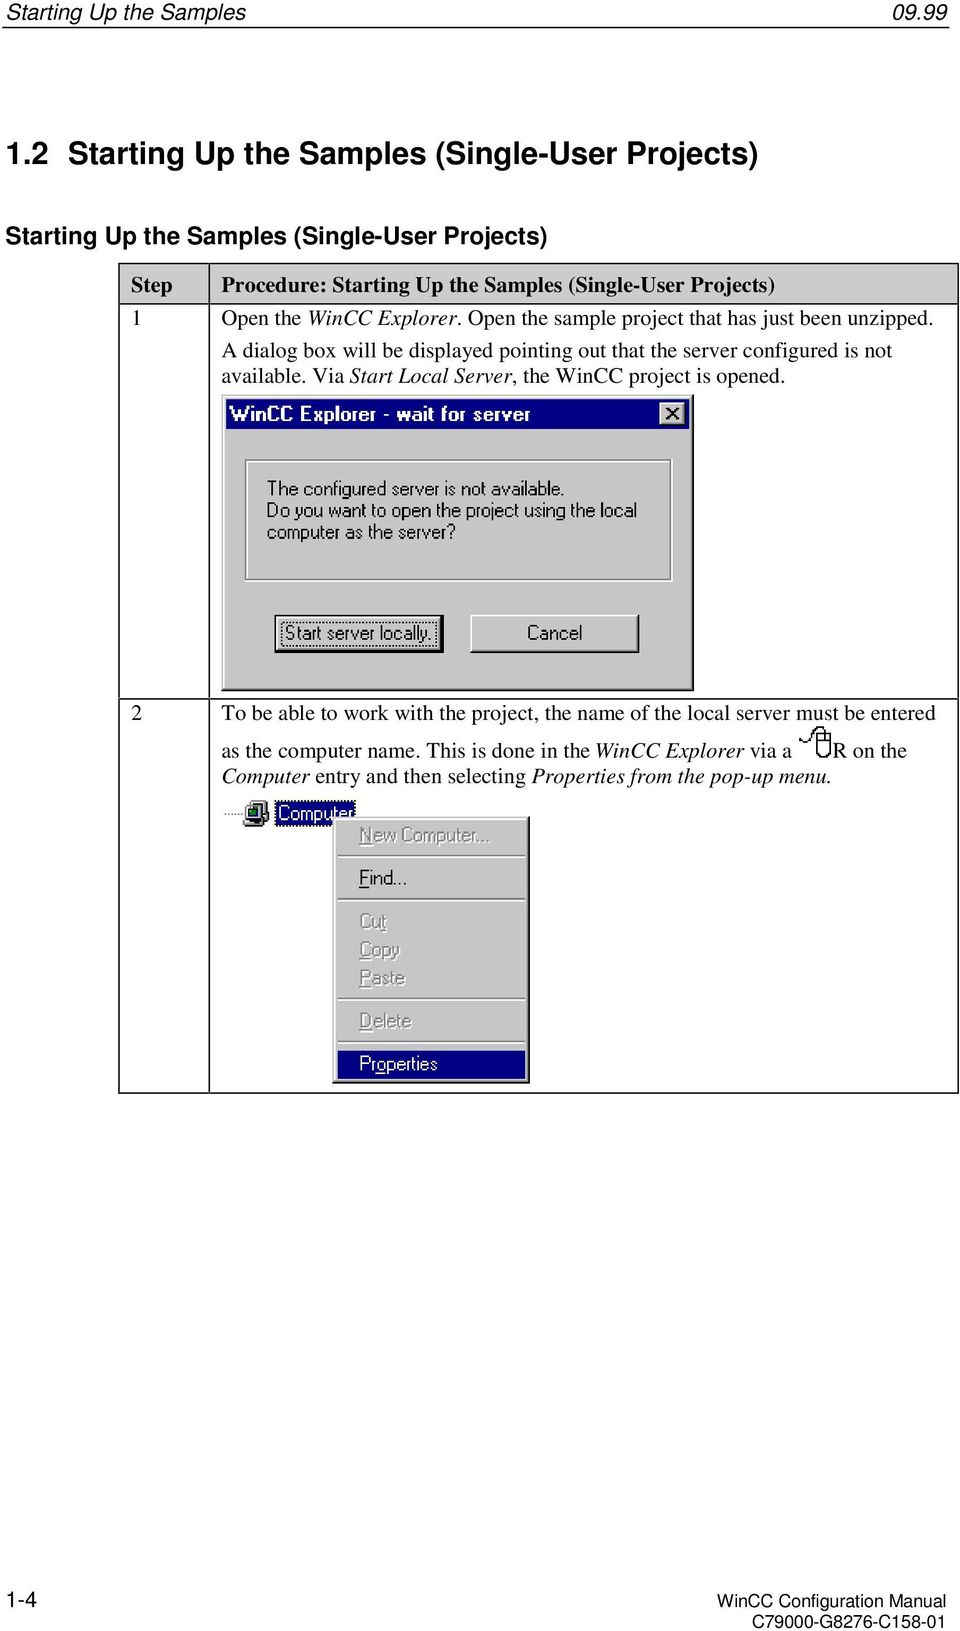 the WinCC Explorer. Open the sample project that has just been unzipped. A dialog box will be displayed pointing out that the server configured is not available.